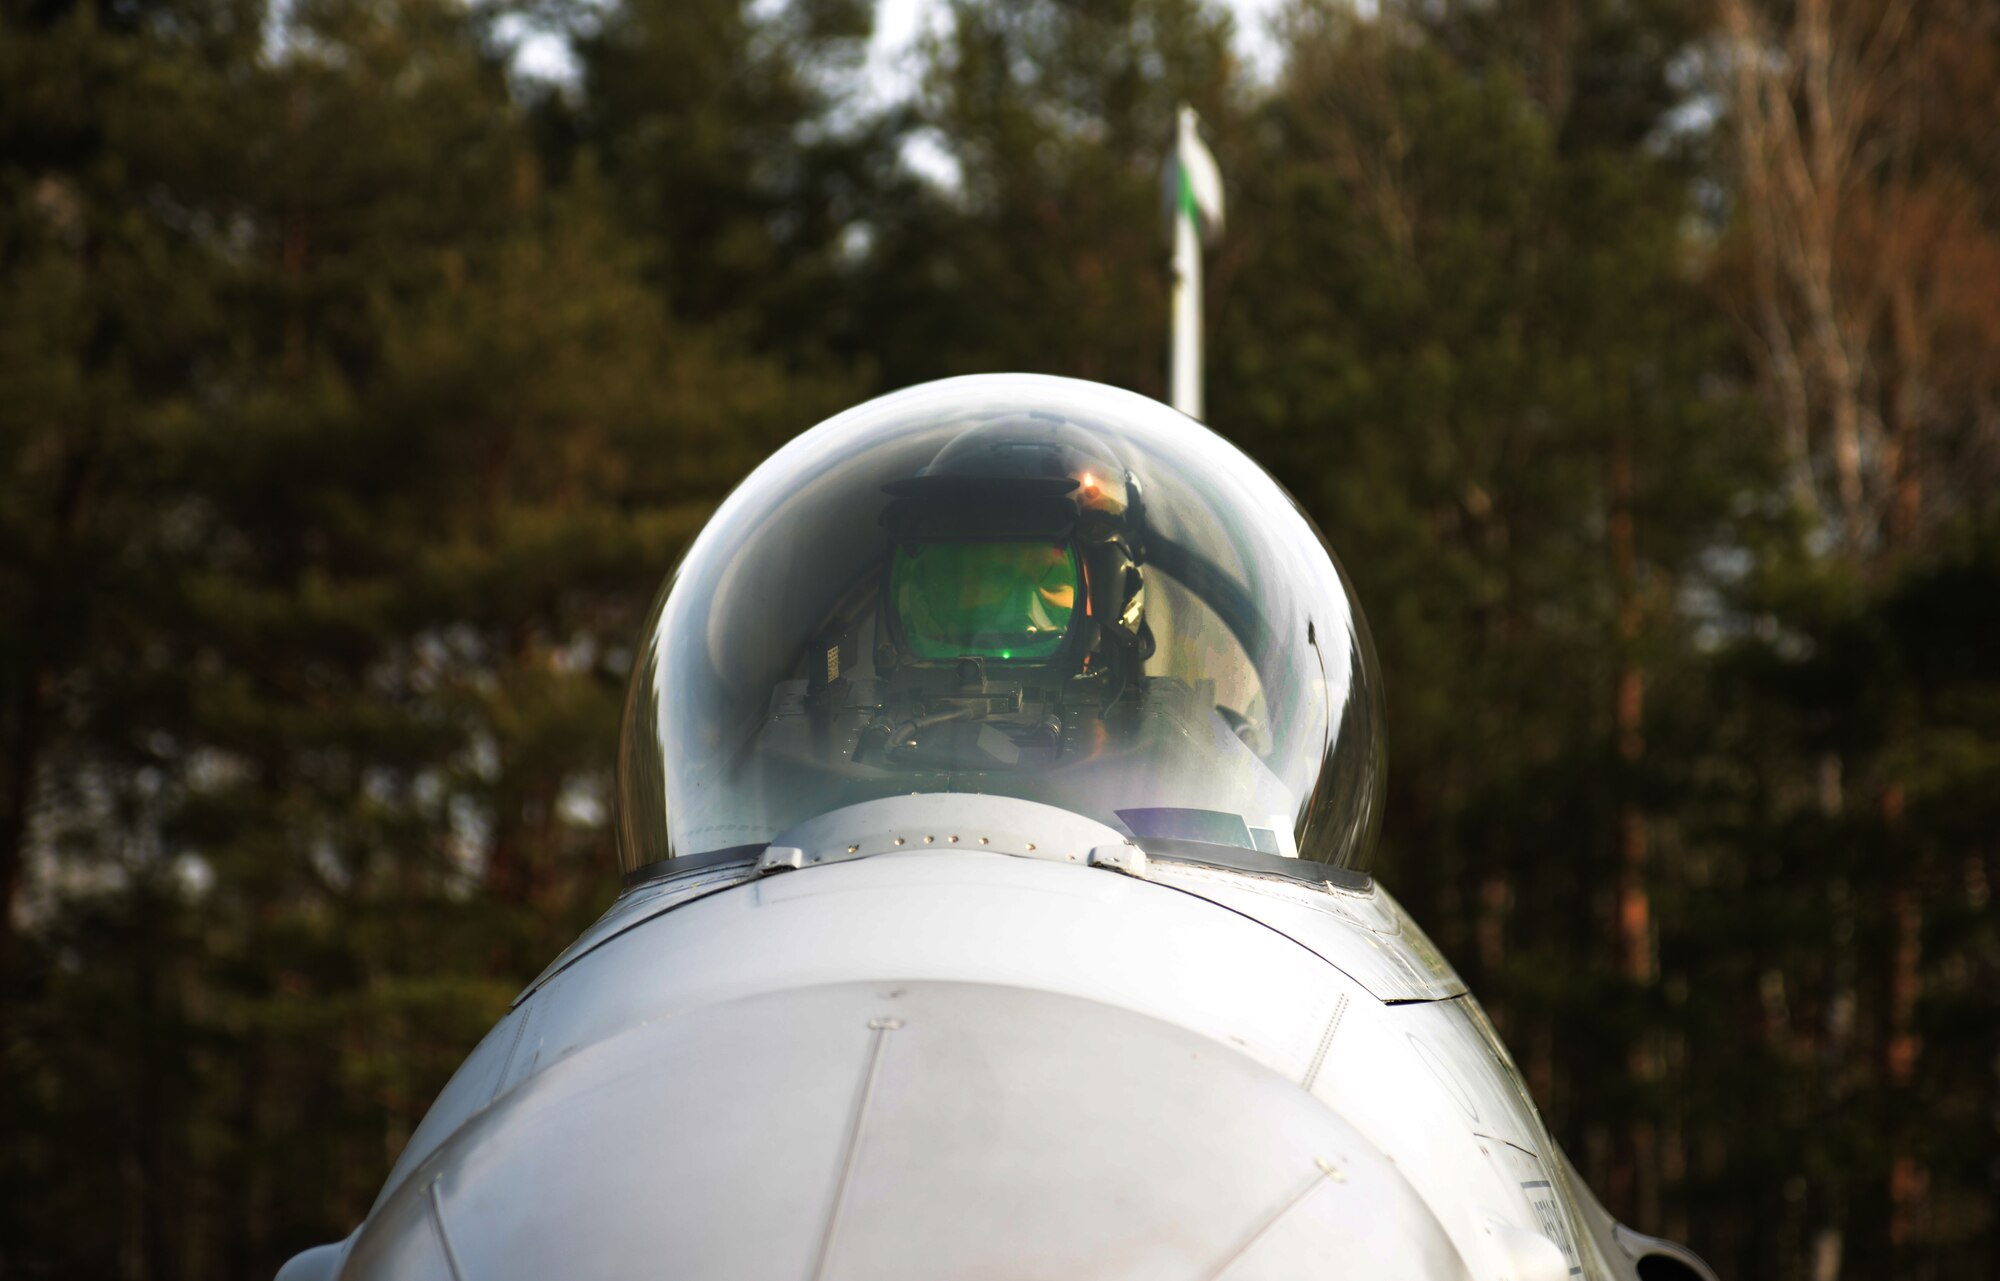 First Lt. Matthew Alexander, 555th Fighter Squadron pilot, Aviano Air Base, Italy, completes his pre-flight check in a U.S. F-16 Fighting Falcon fighter aircraft, before joining his Polish wingman in the skies above Łask Air Base, Poland, April 1, 2014. The Polish armed forces and approximately 200 U.S. personnel have worked together here since March 13, to increase cooperation and strengthen operational understanding of the other’s military processes, strengthening interoperability with a key NATO ally. (U.S. Air Force photo by 2nd Lt. Katrina Cheesman/Released)